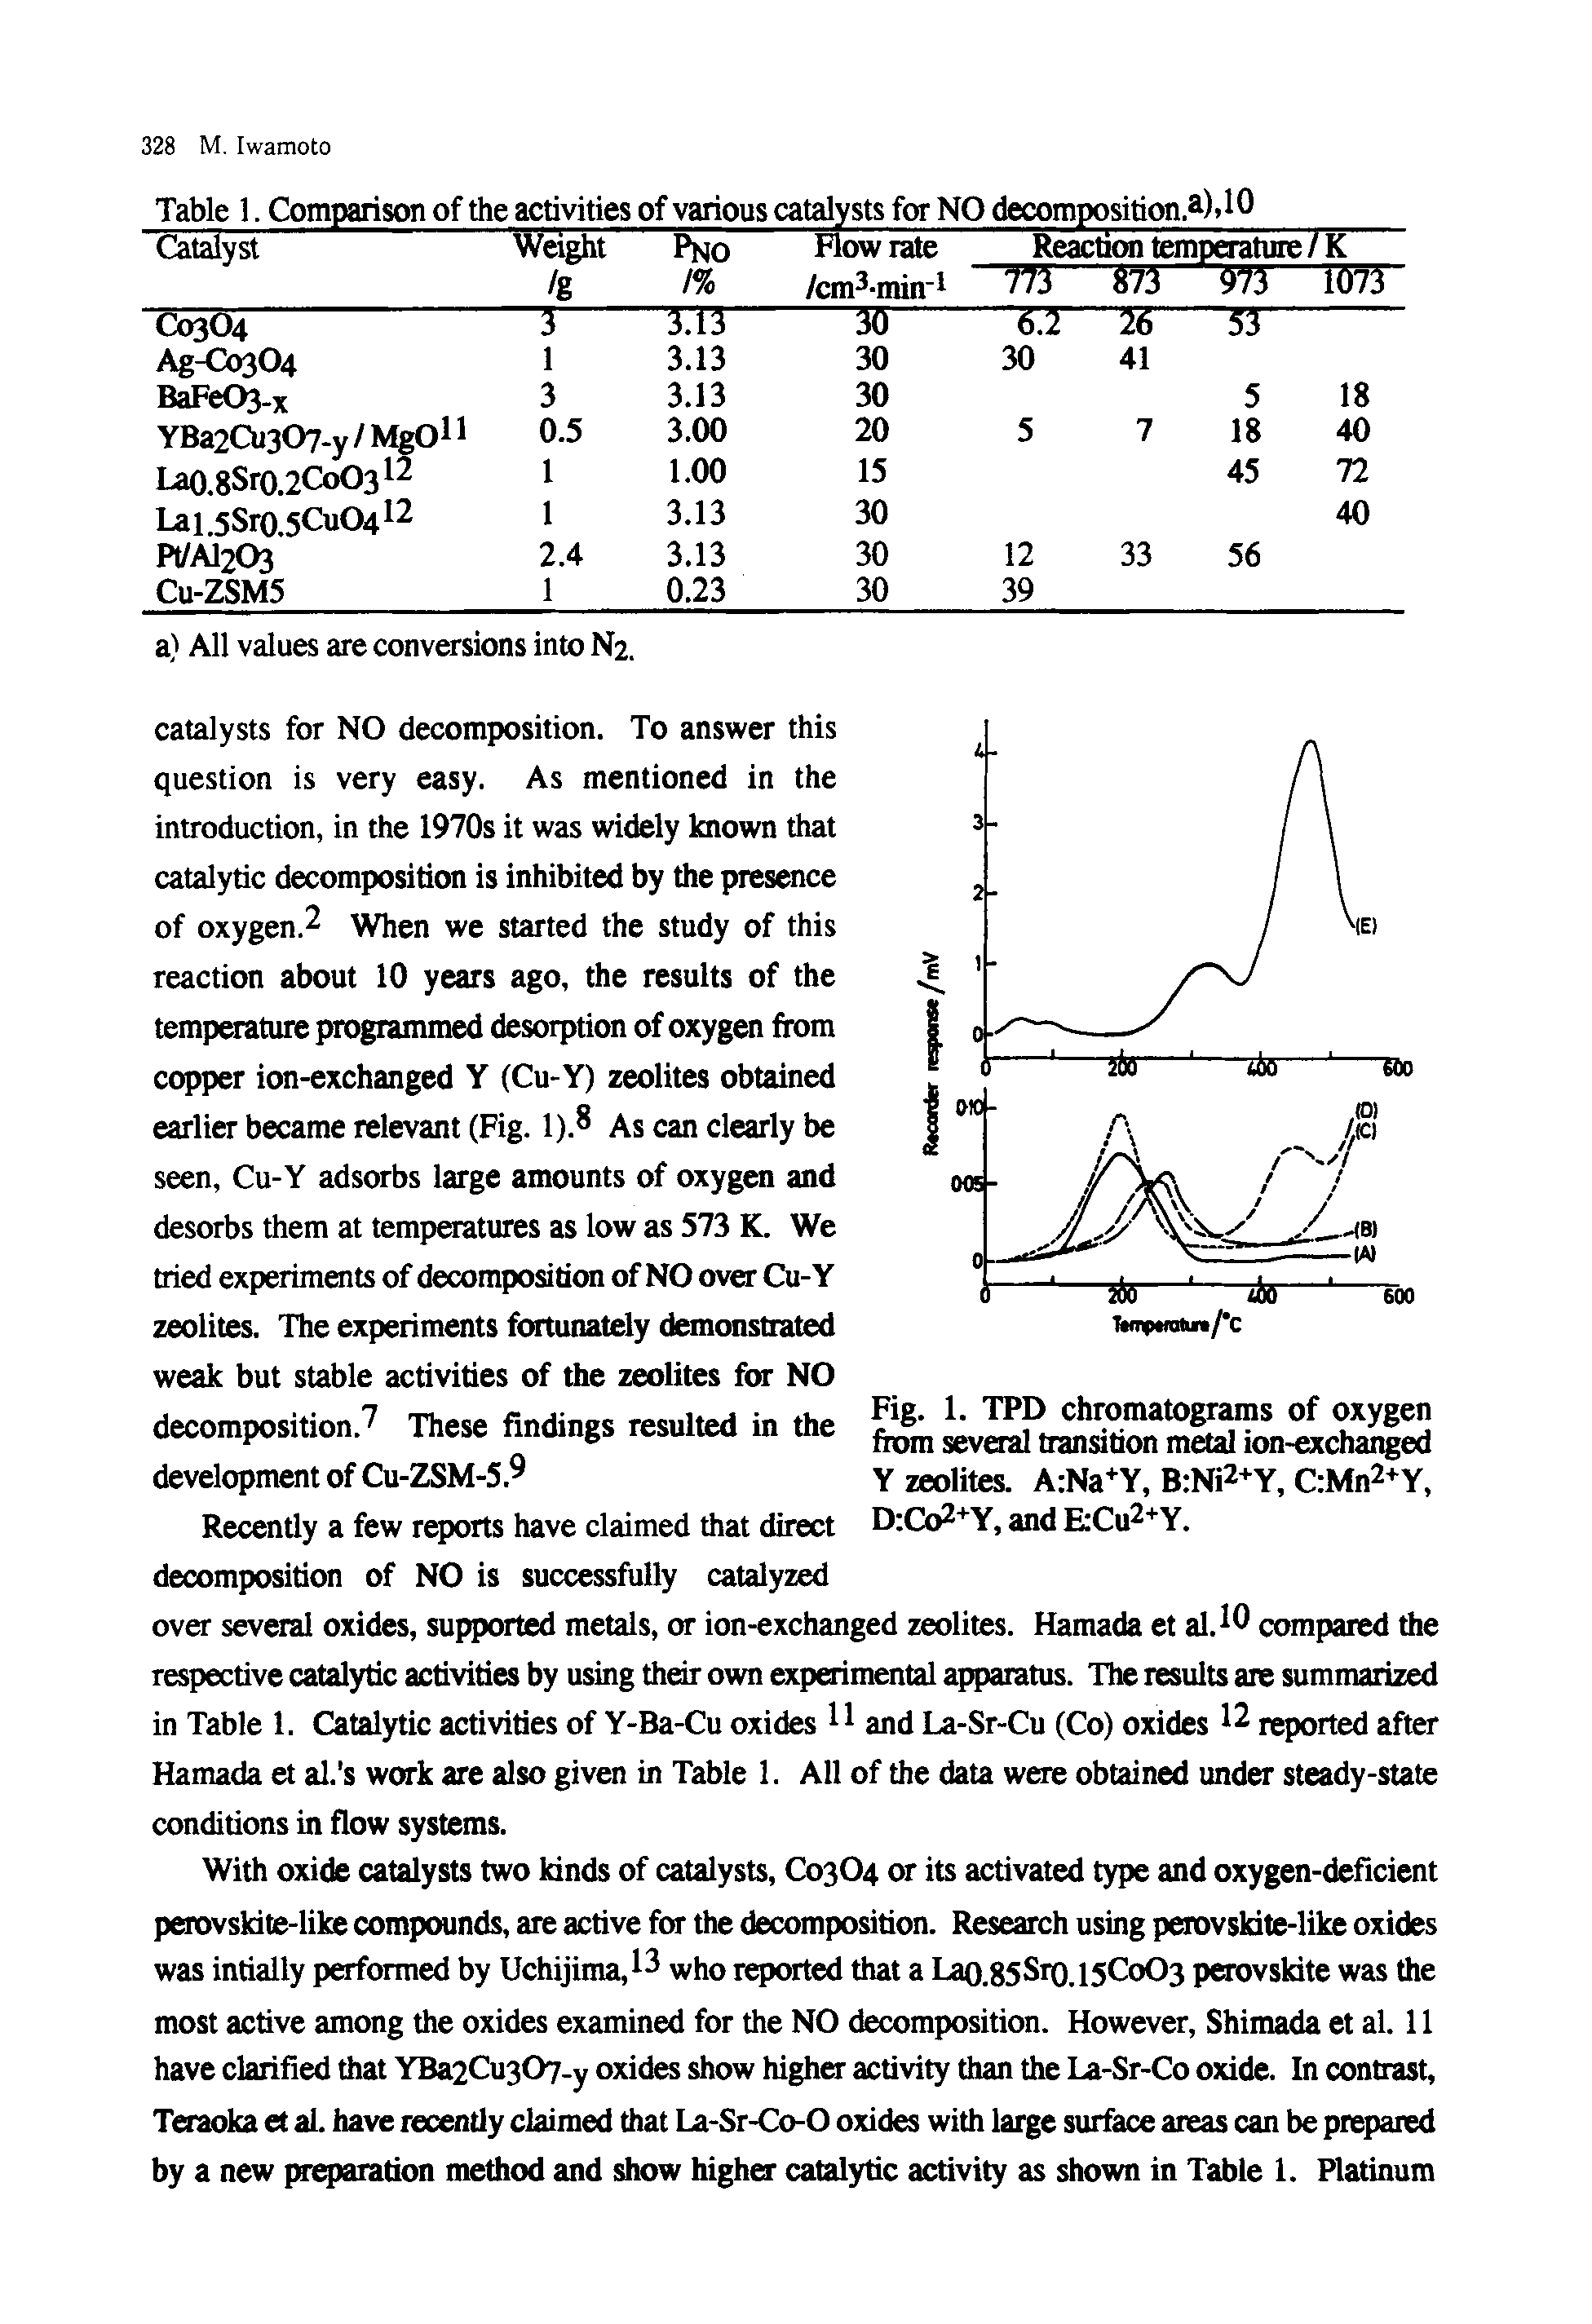 Fig. 1. TPD chromatograms of oxygen from several transition metal ion-exchanged Y zeolites. A Na Y, B Ni2+Y, C Mn2+Y, D Co2+Y,andE Cu2+Y.